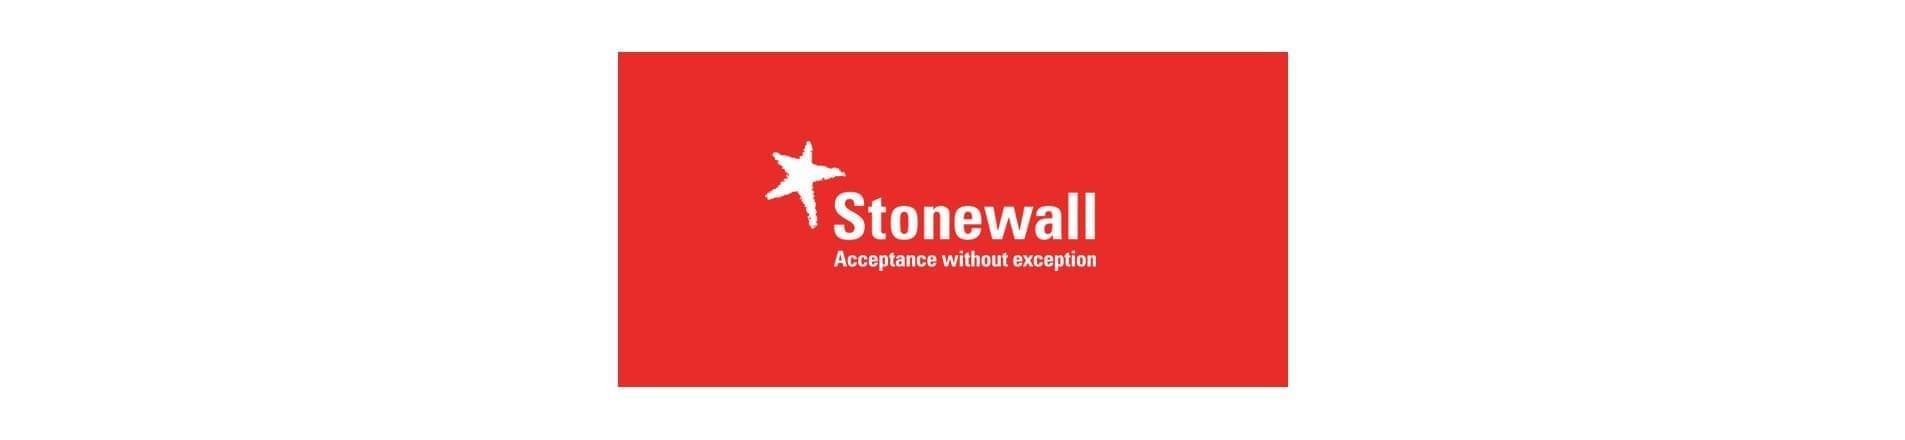 Stone Wall Logo - Stonewall Commemorates the Top Global Employers for LGBT Staff | Vercida